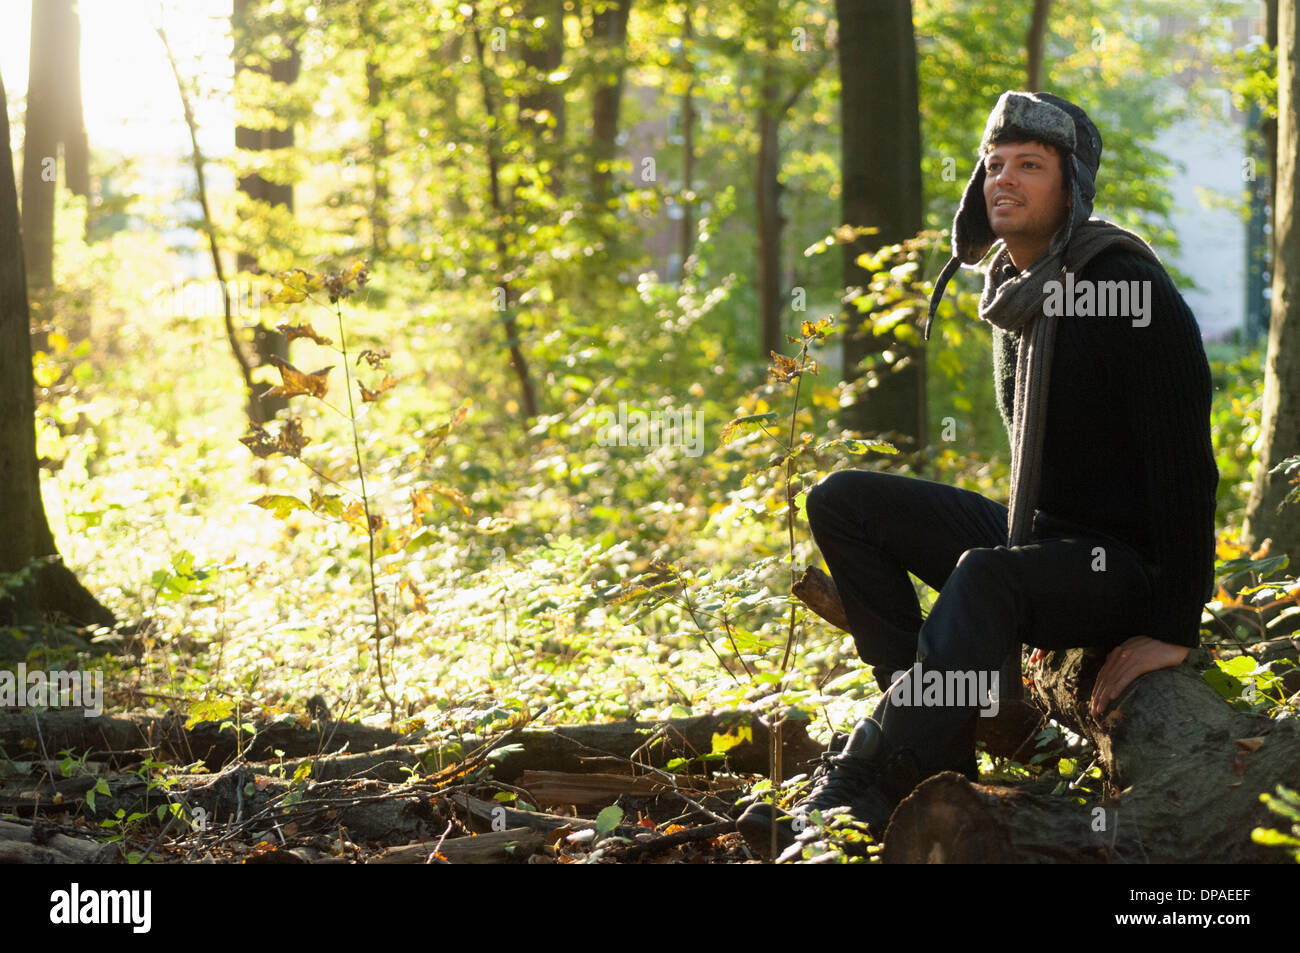 Portrait of mid adult man sitting on log in forest Banque D'Images